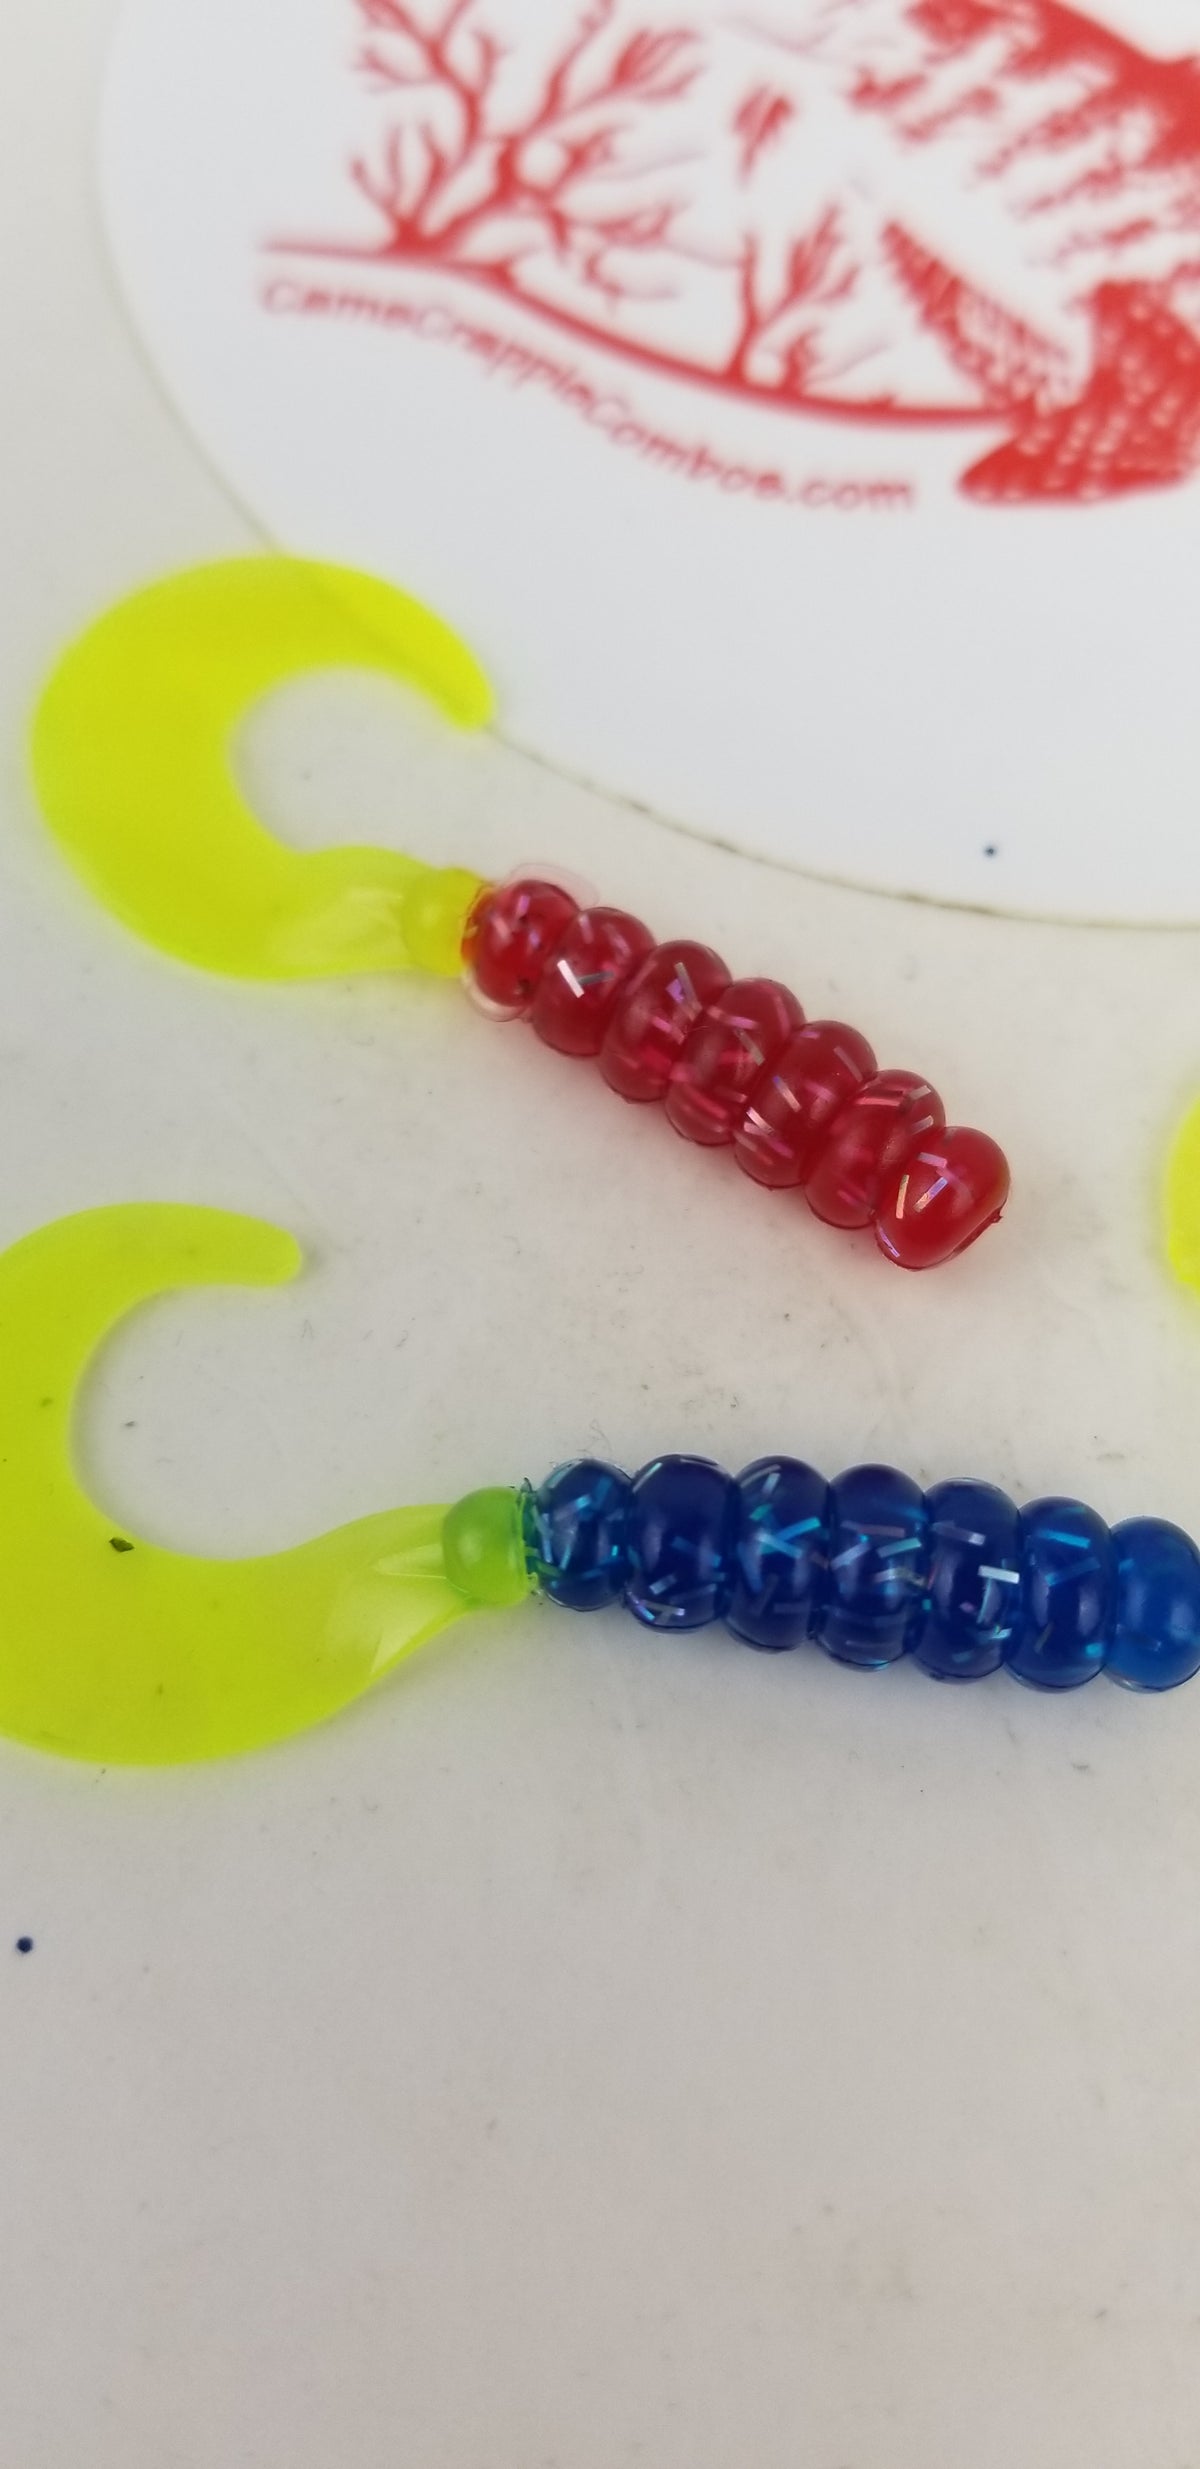 Cam's RED & BLUE Complete Curly Tail [Hologram Flake] Starter Assortment Package Kit